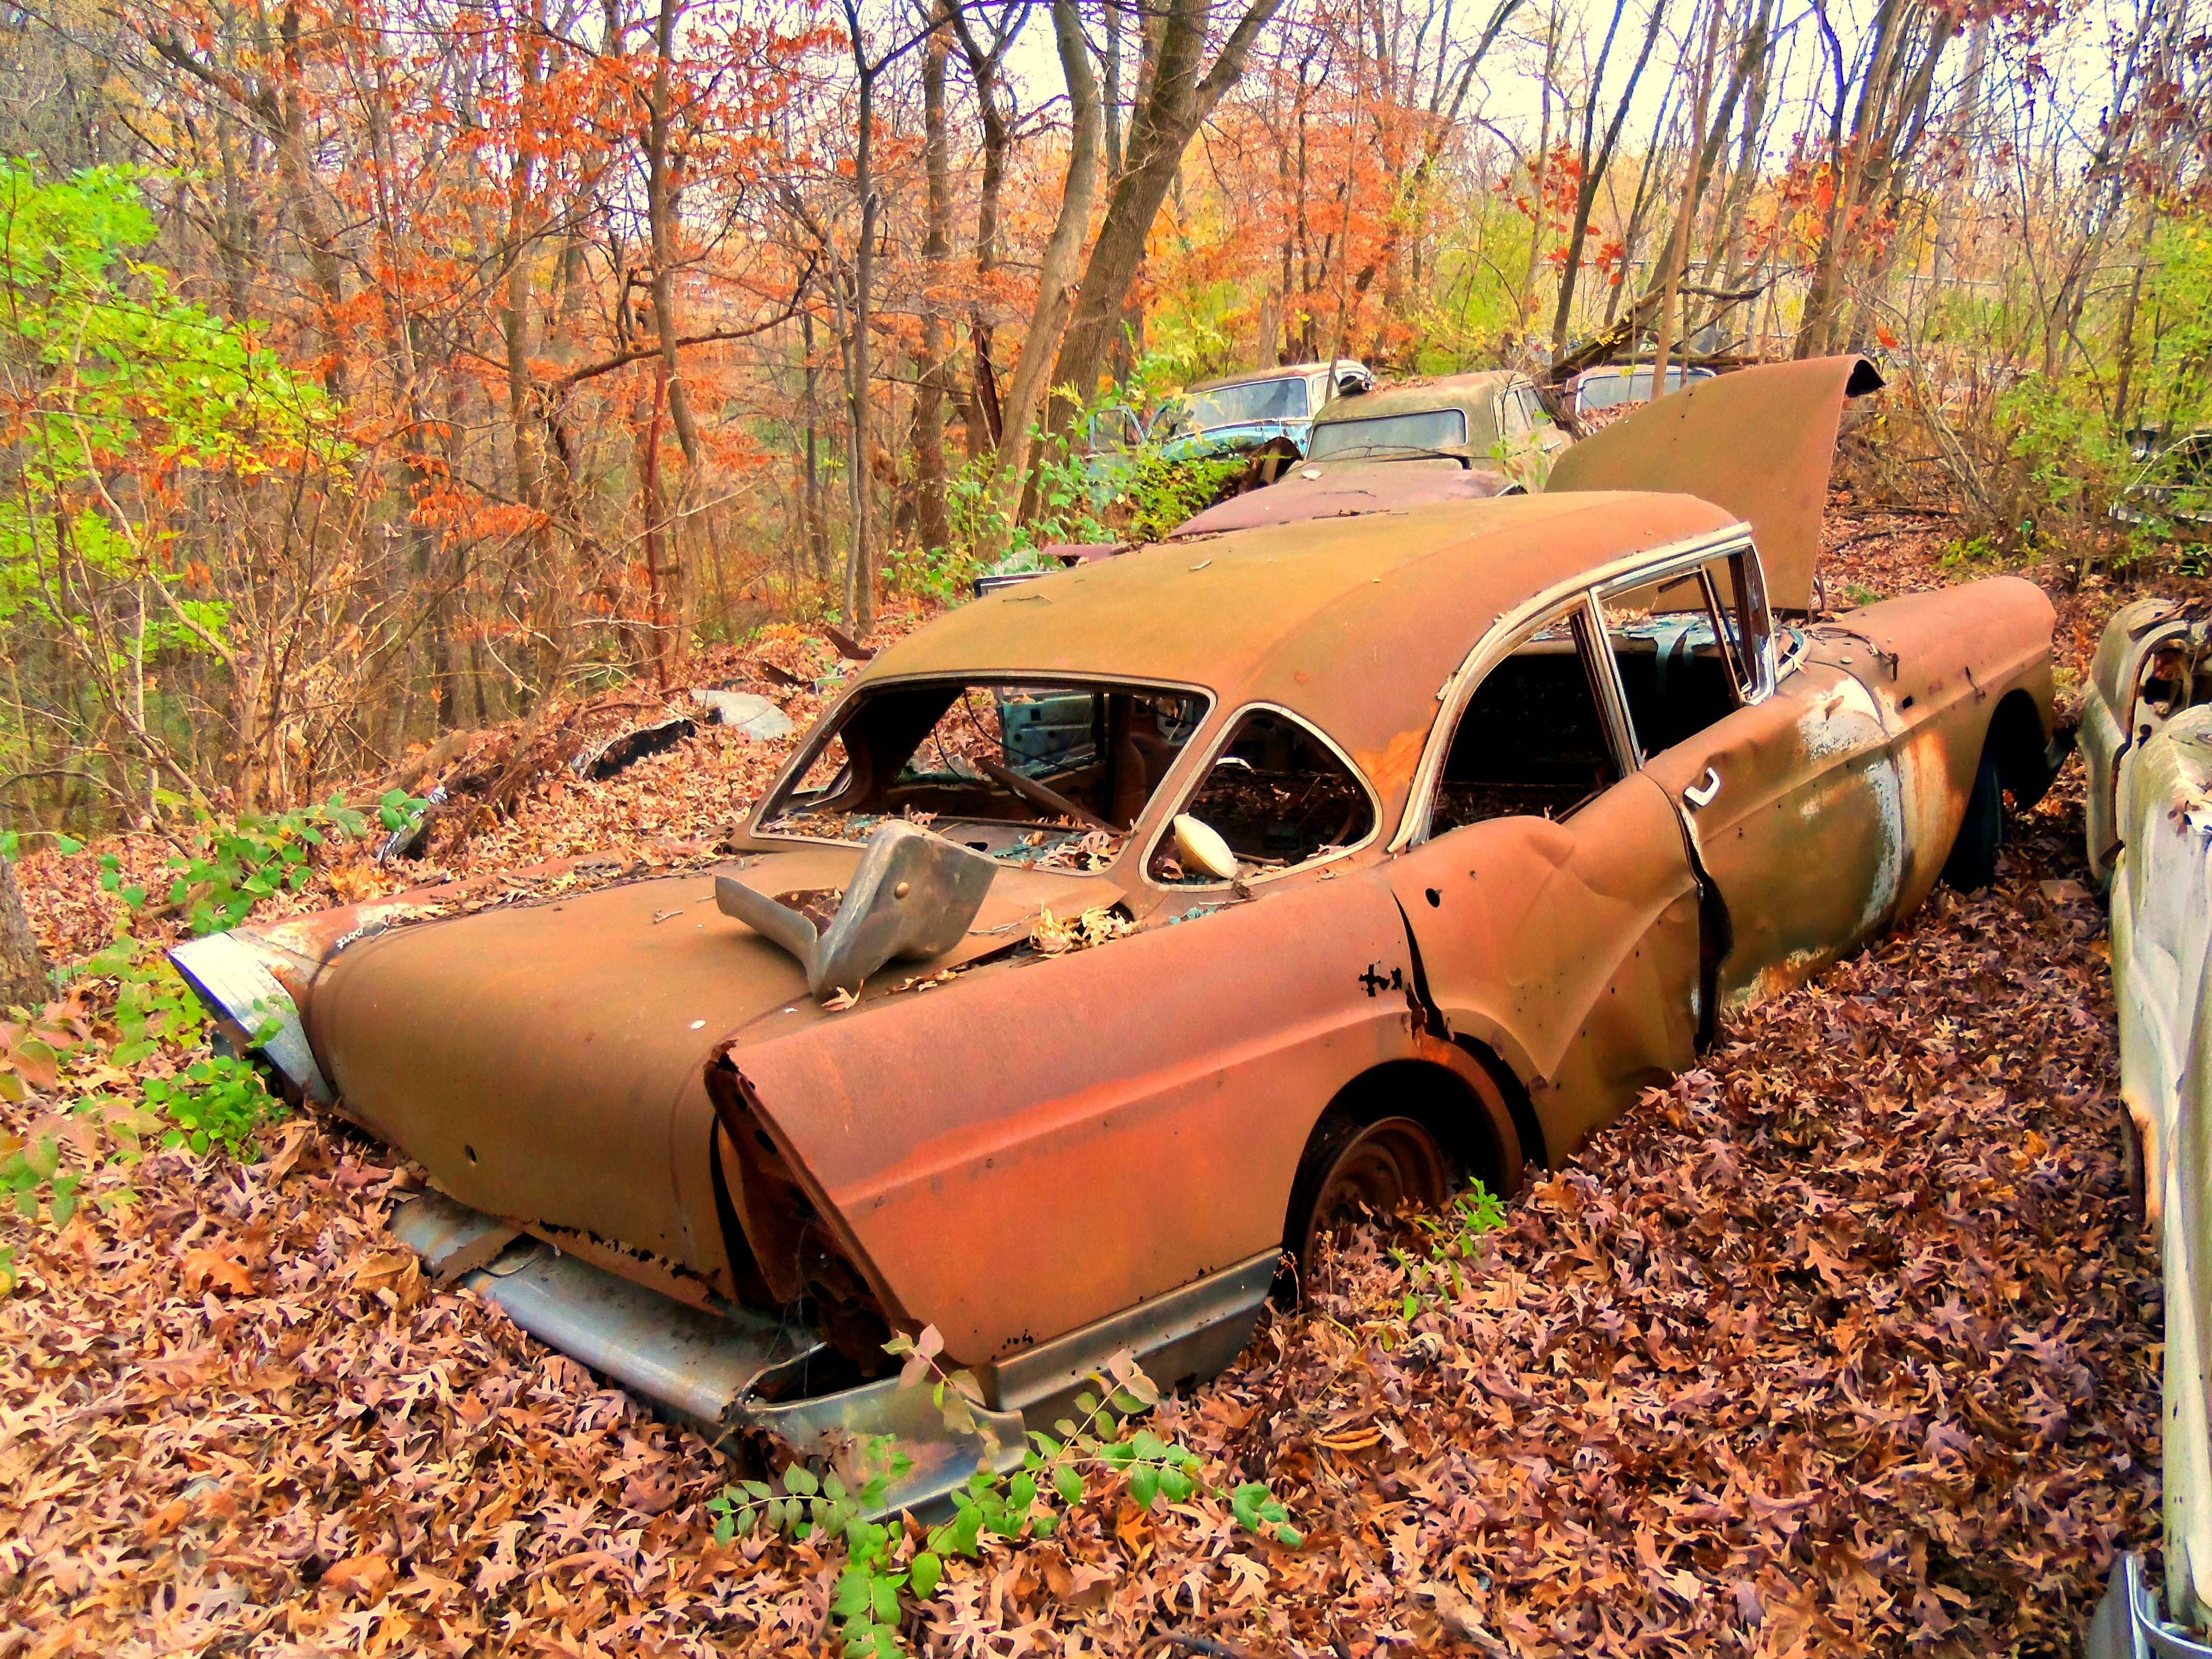 Old rusting cars